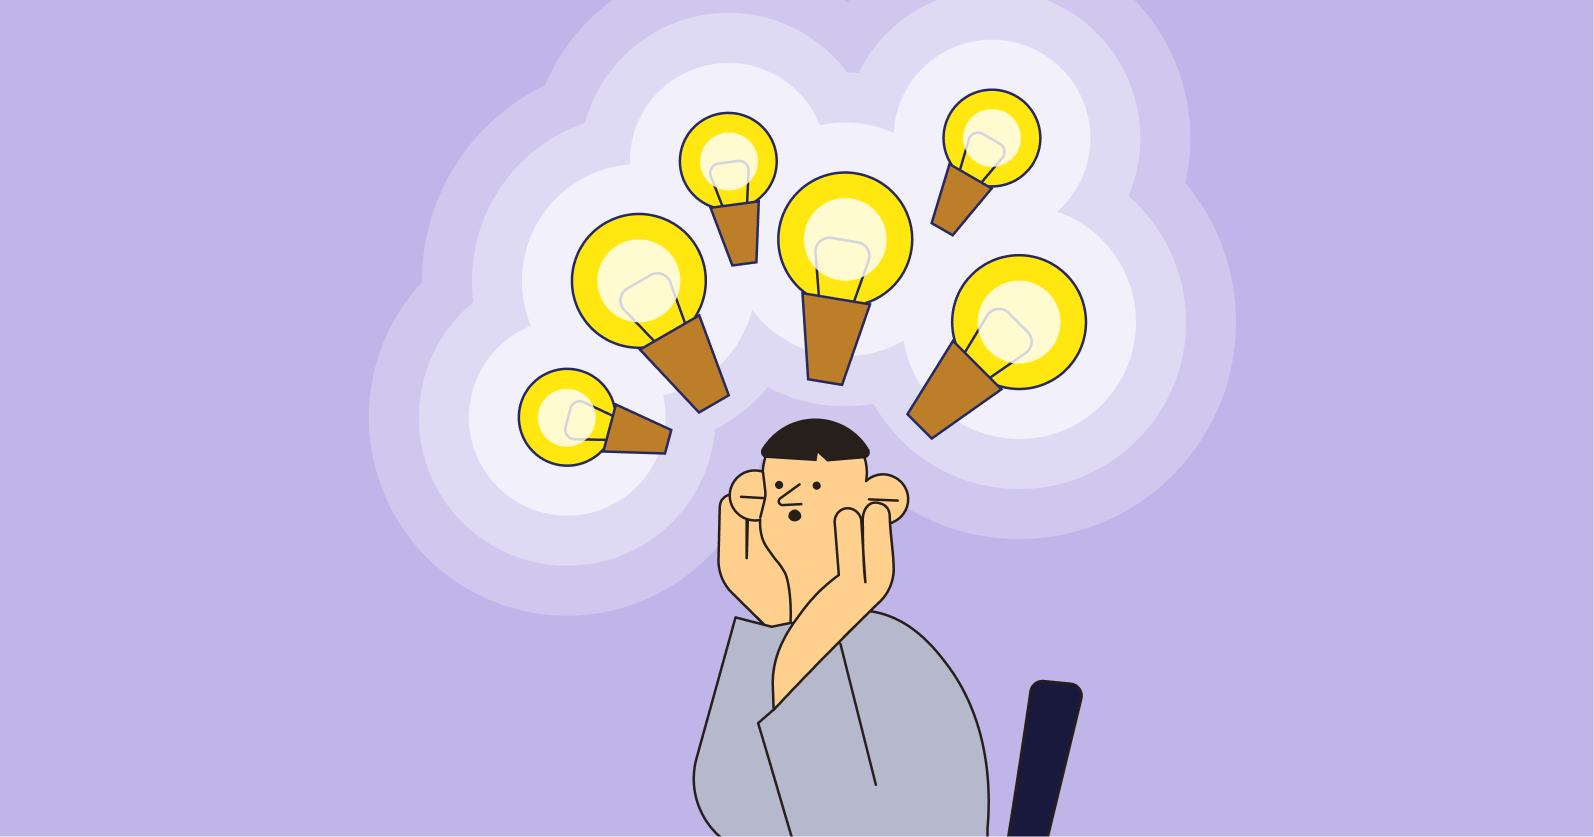 Illustration of a person with a lot of light bulbs above their head to symbolise ideas.